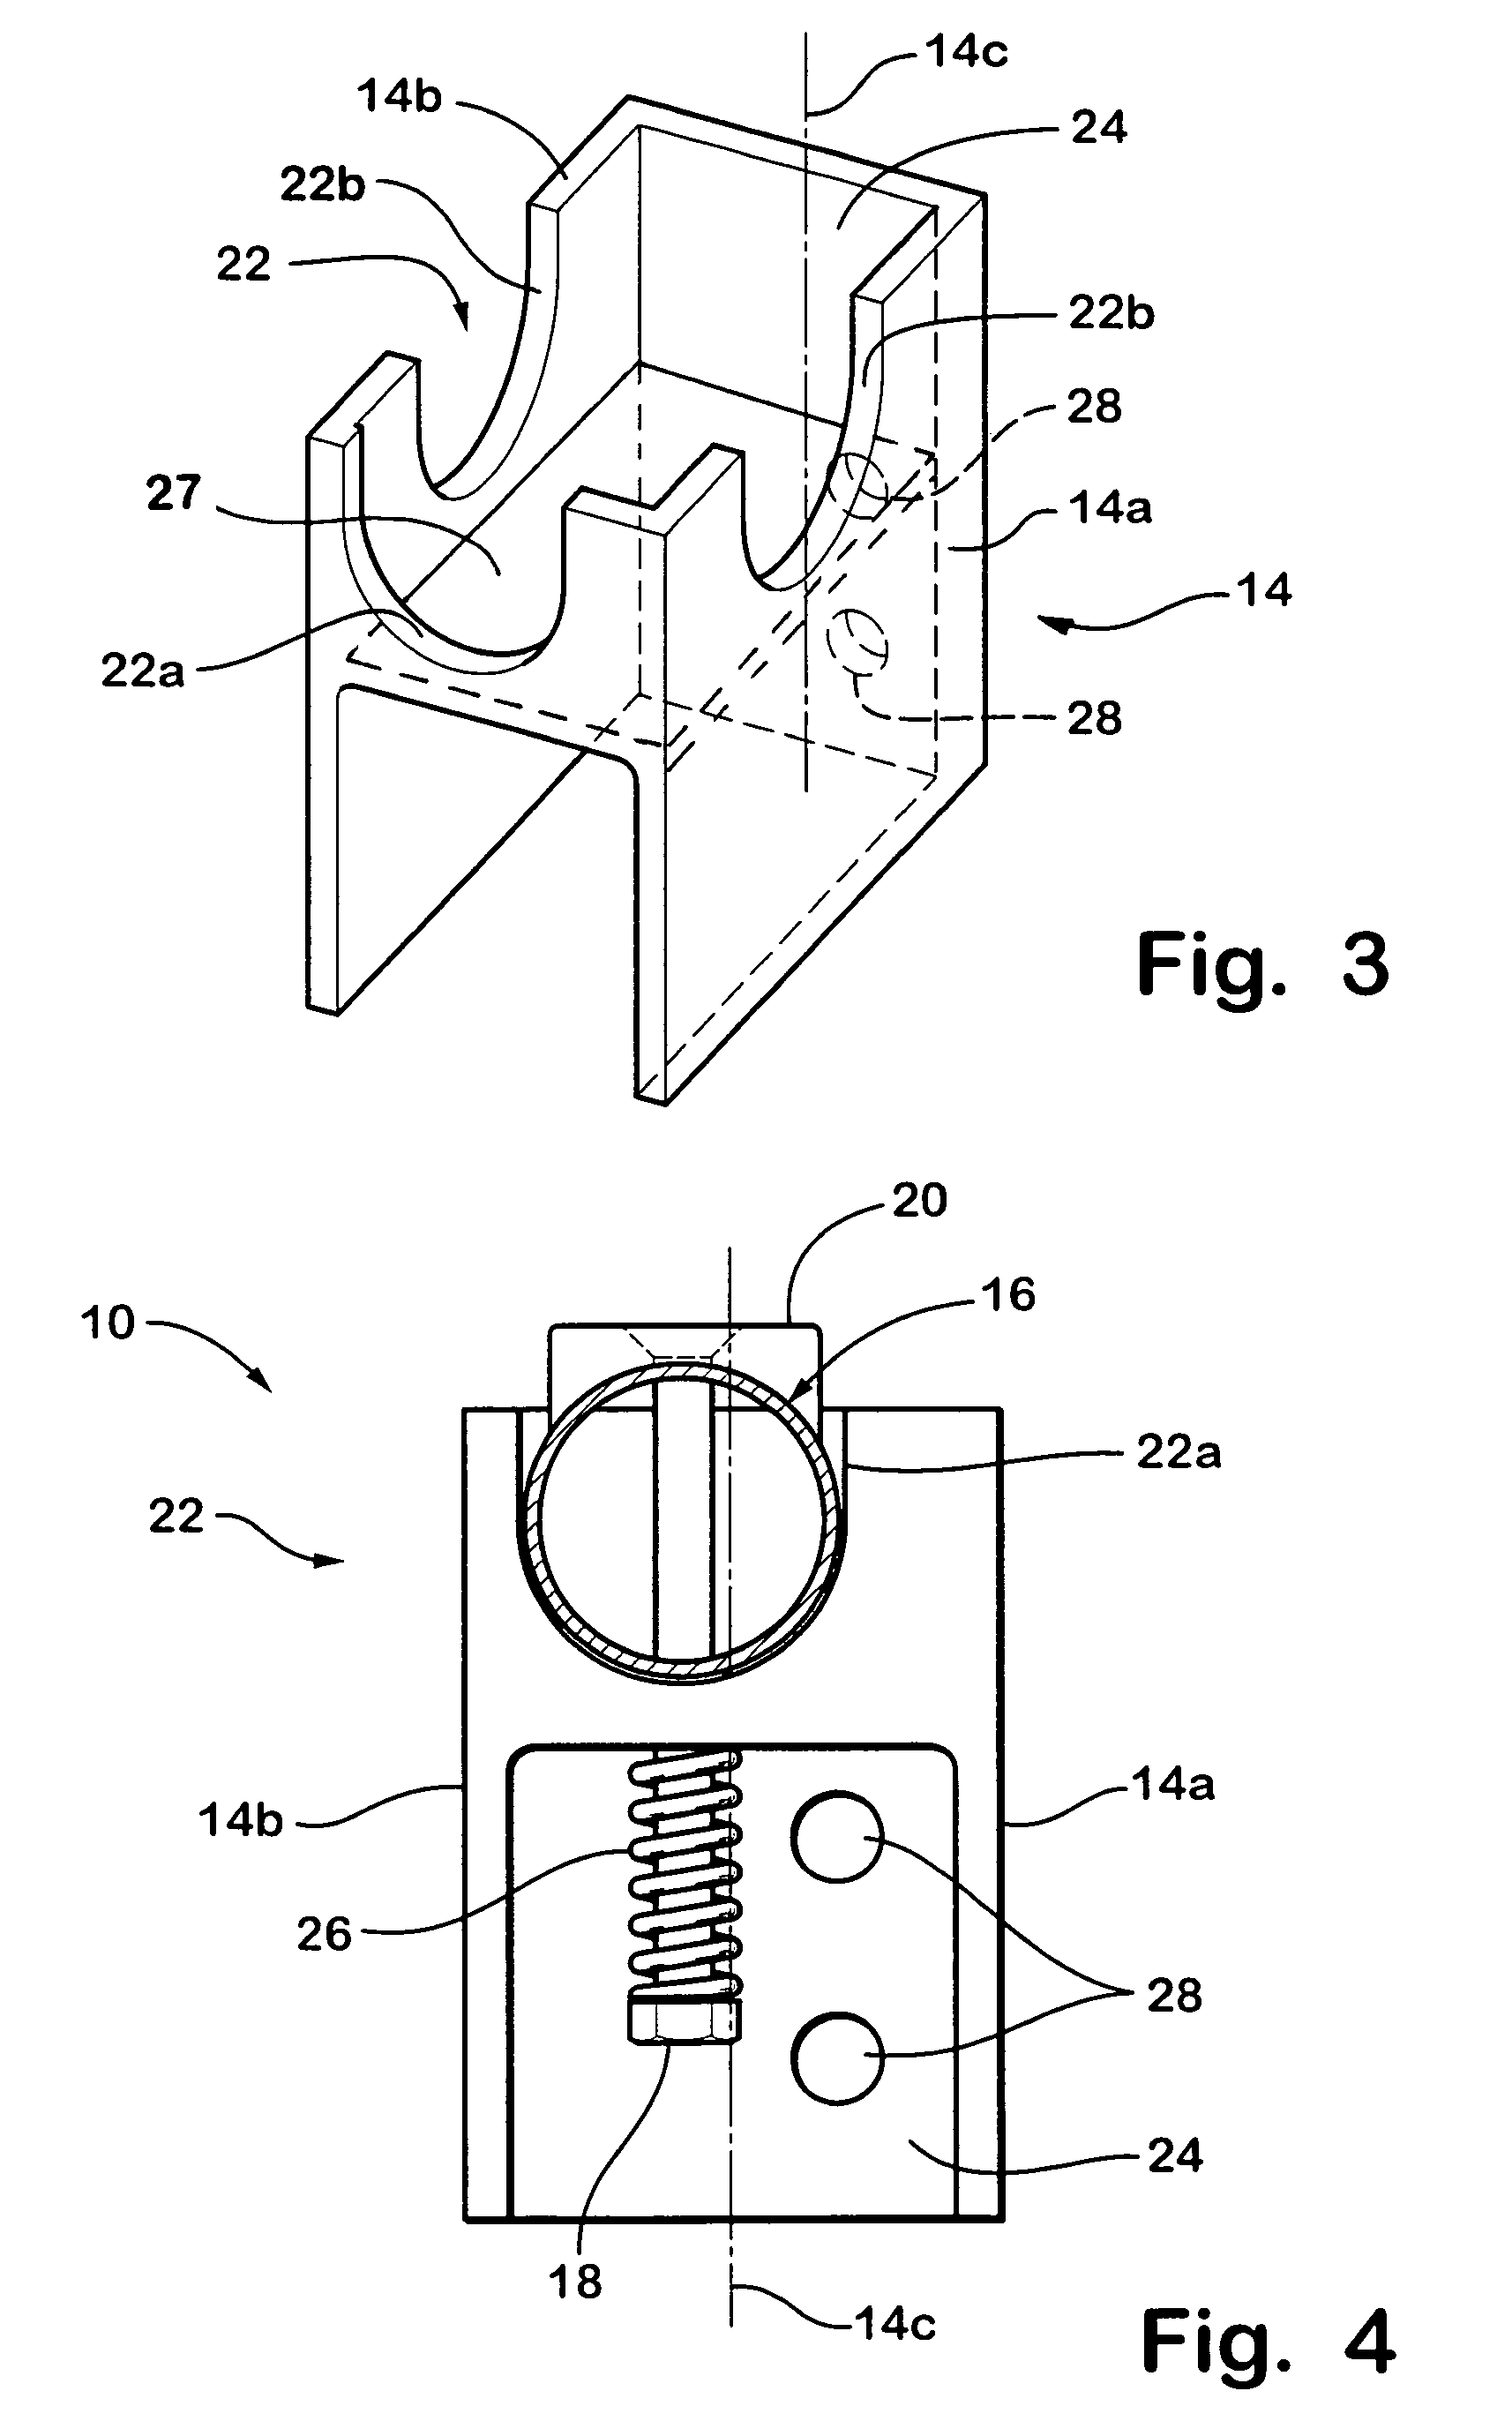 Method for installing a foldaway hand rail to a vehicle